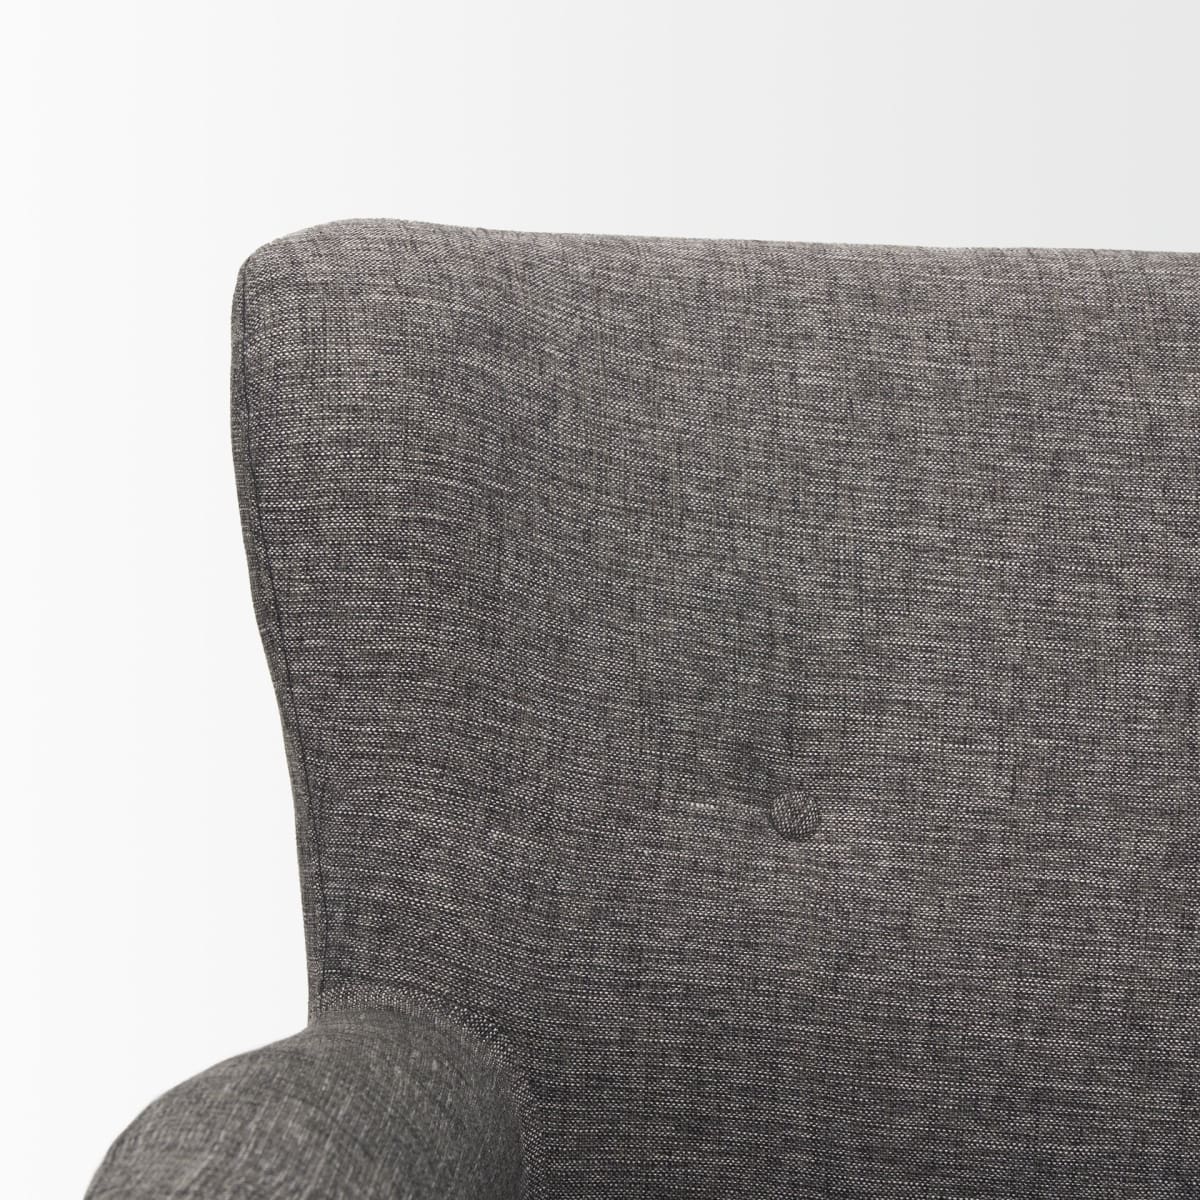 Dunstan Accent Chair Charcoal Fabric - accent-chairs